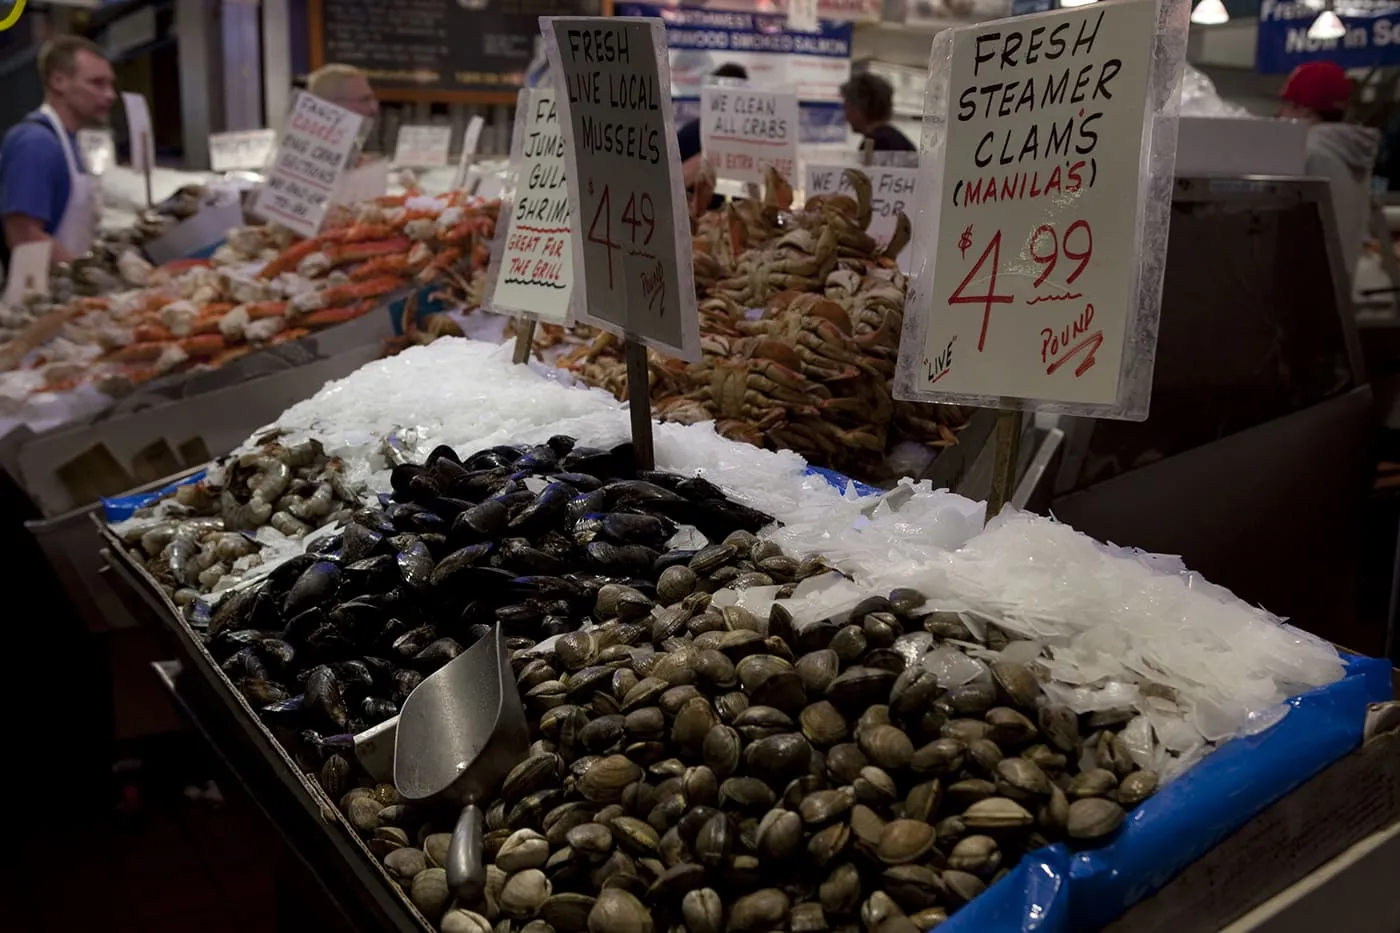 Clams and mussels for sale at Pike Place Market in Seattle, Washington.